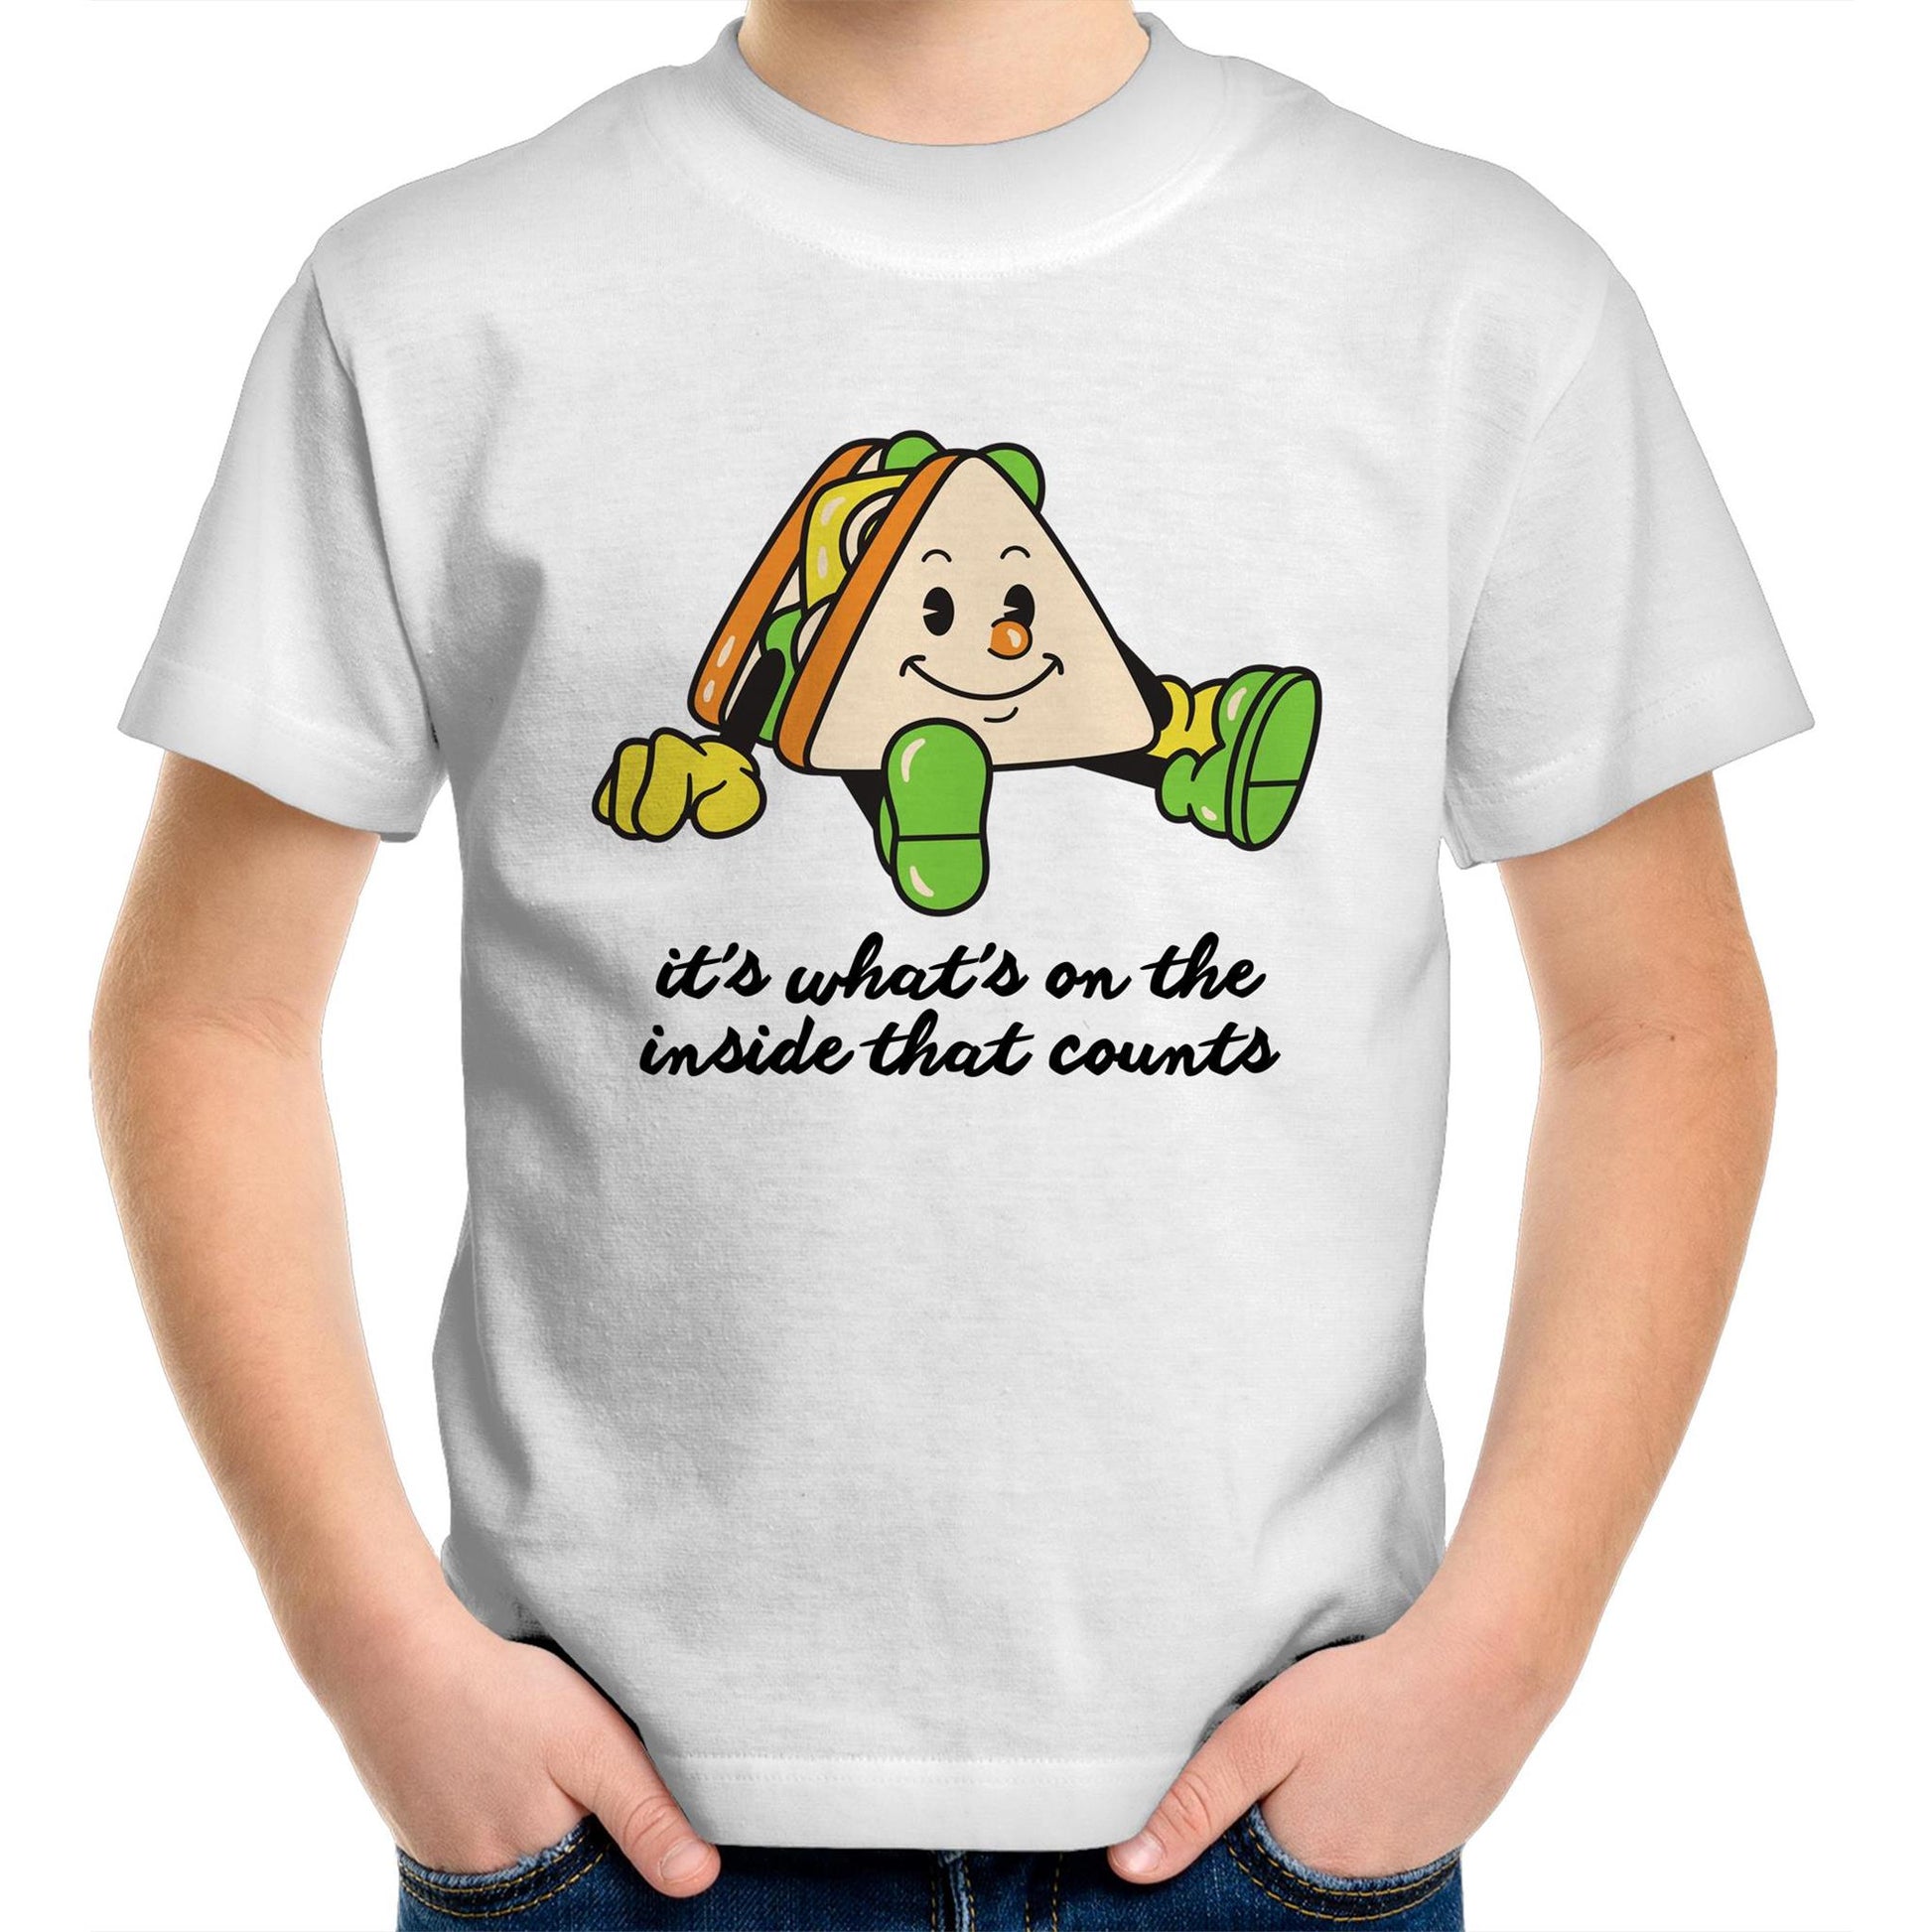 Sandwich, It's What's On The Inside That Counts - Kids Youth T-Shirt White Kids Youth T-shirt Food Motivation